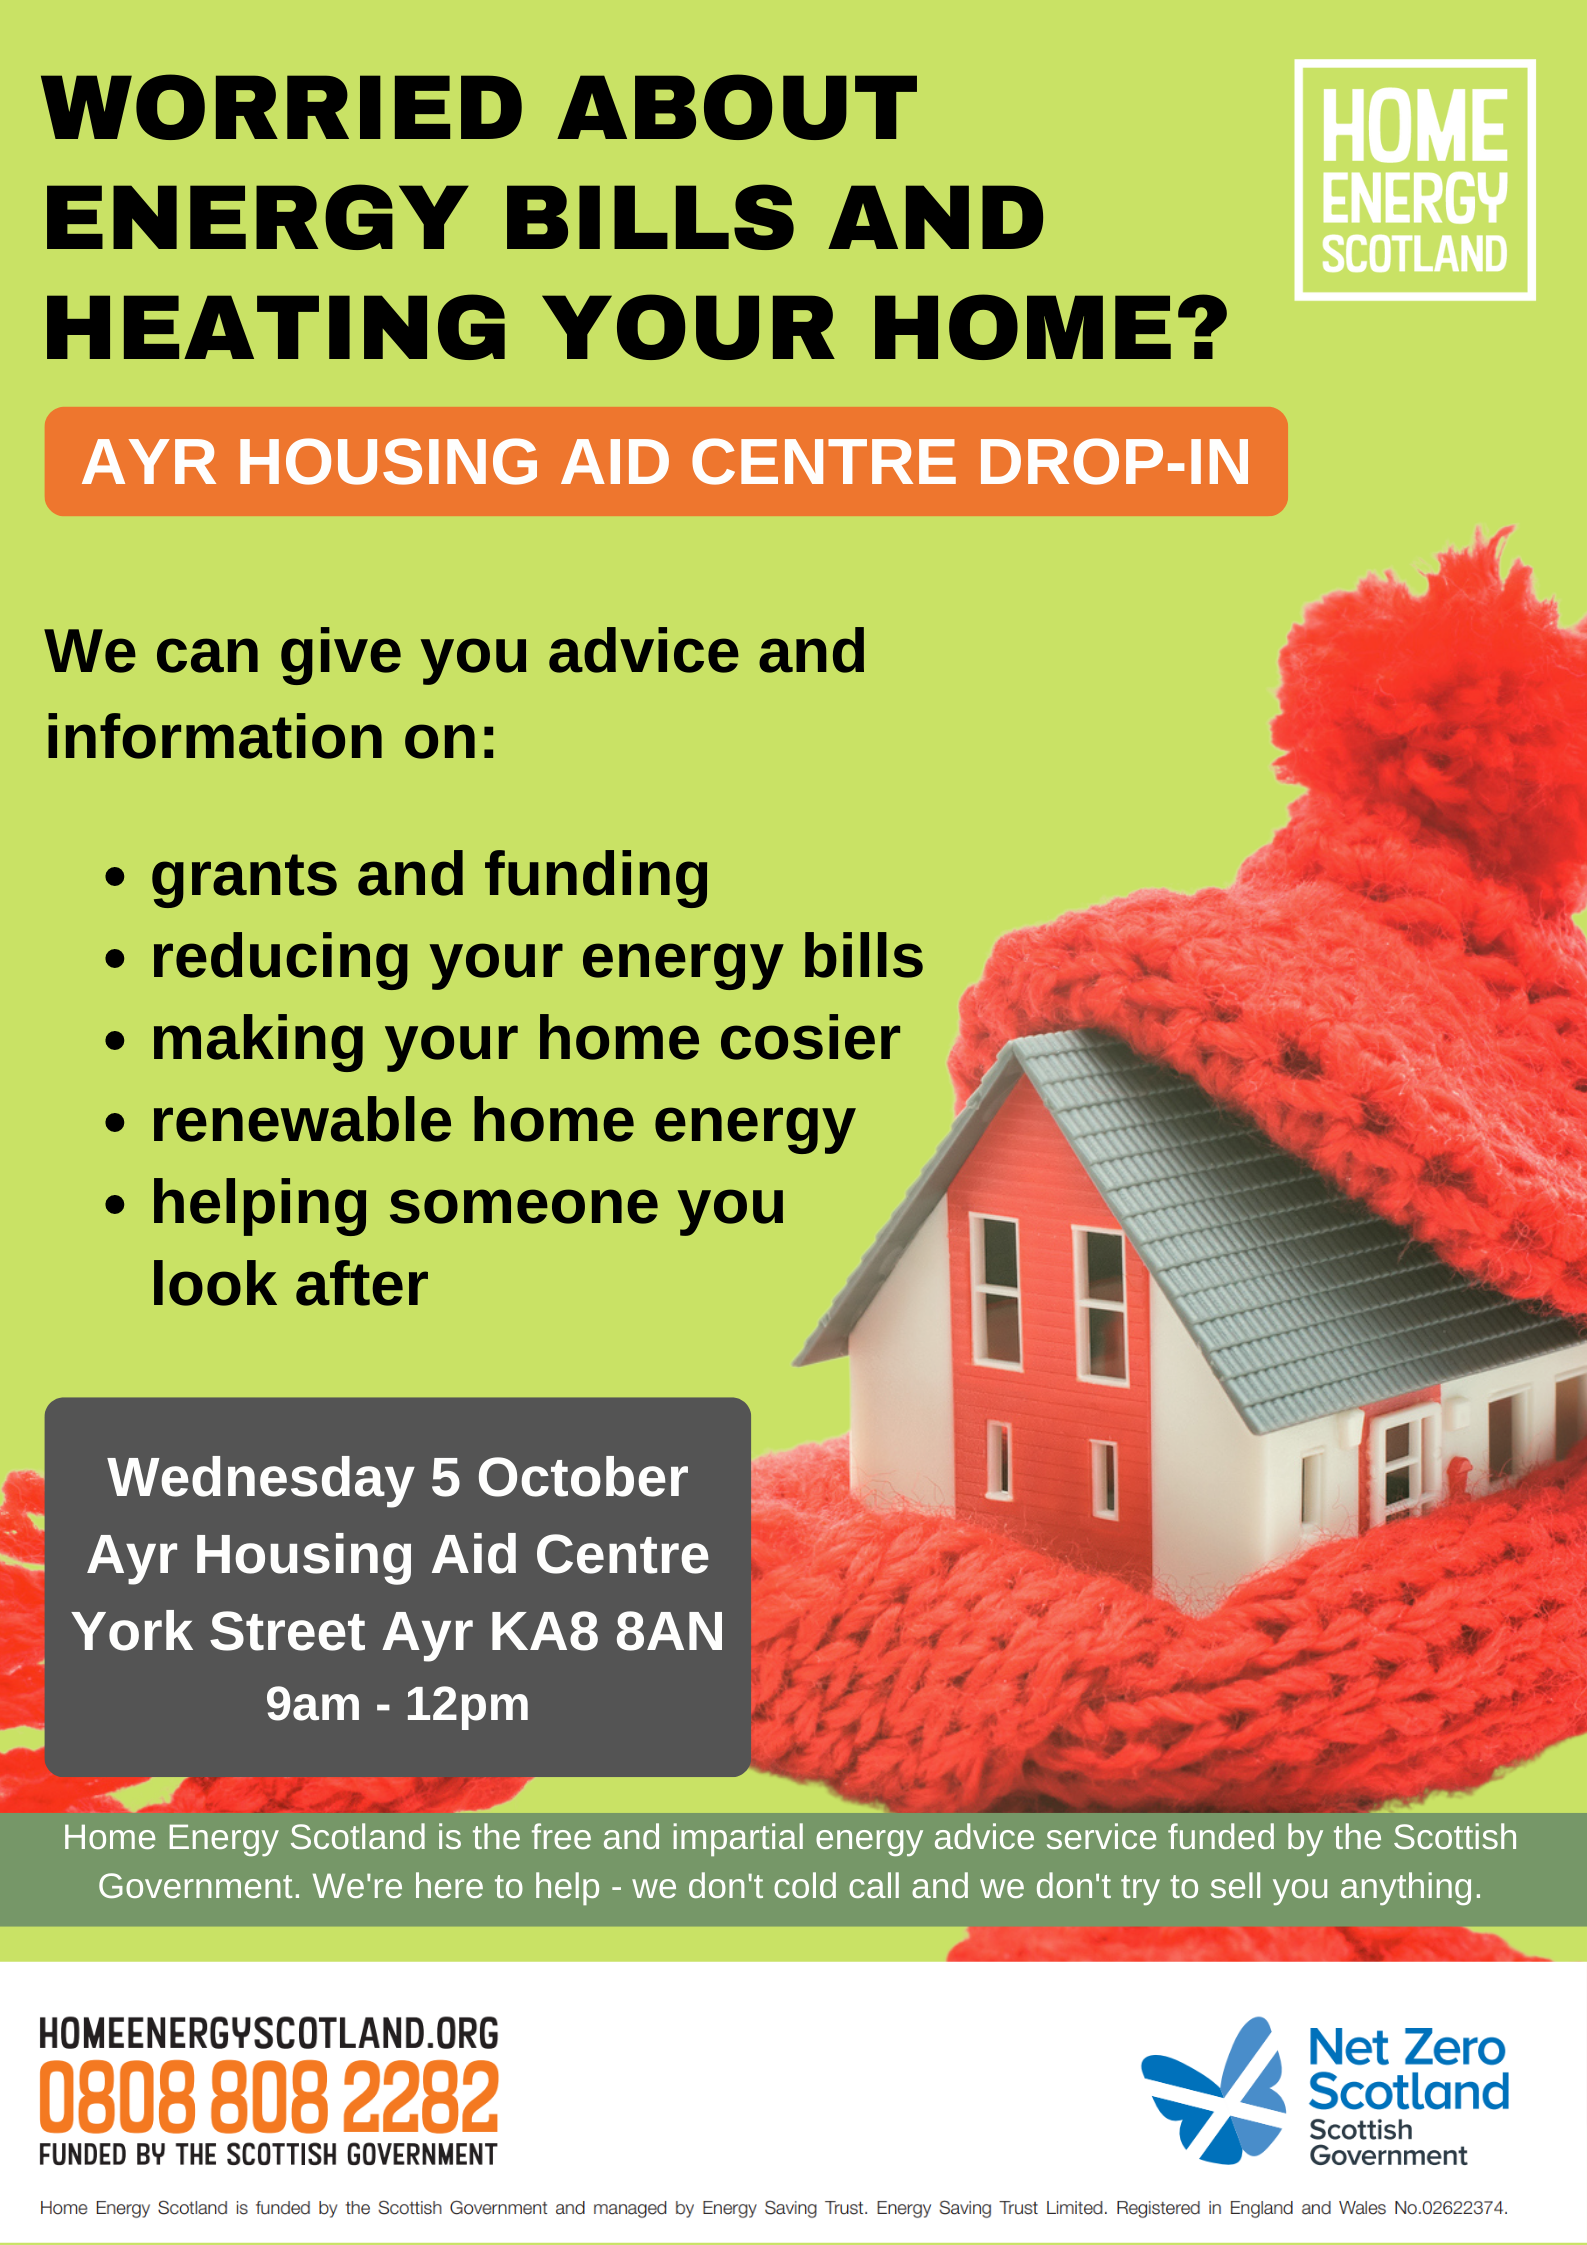 We can give you advice and information on:

grants and funding, reducing your energy bills, making your home cosier, renewable home energy, helping someone you look after